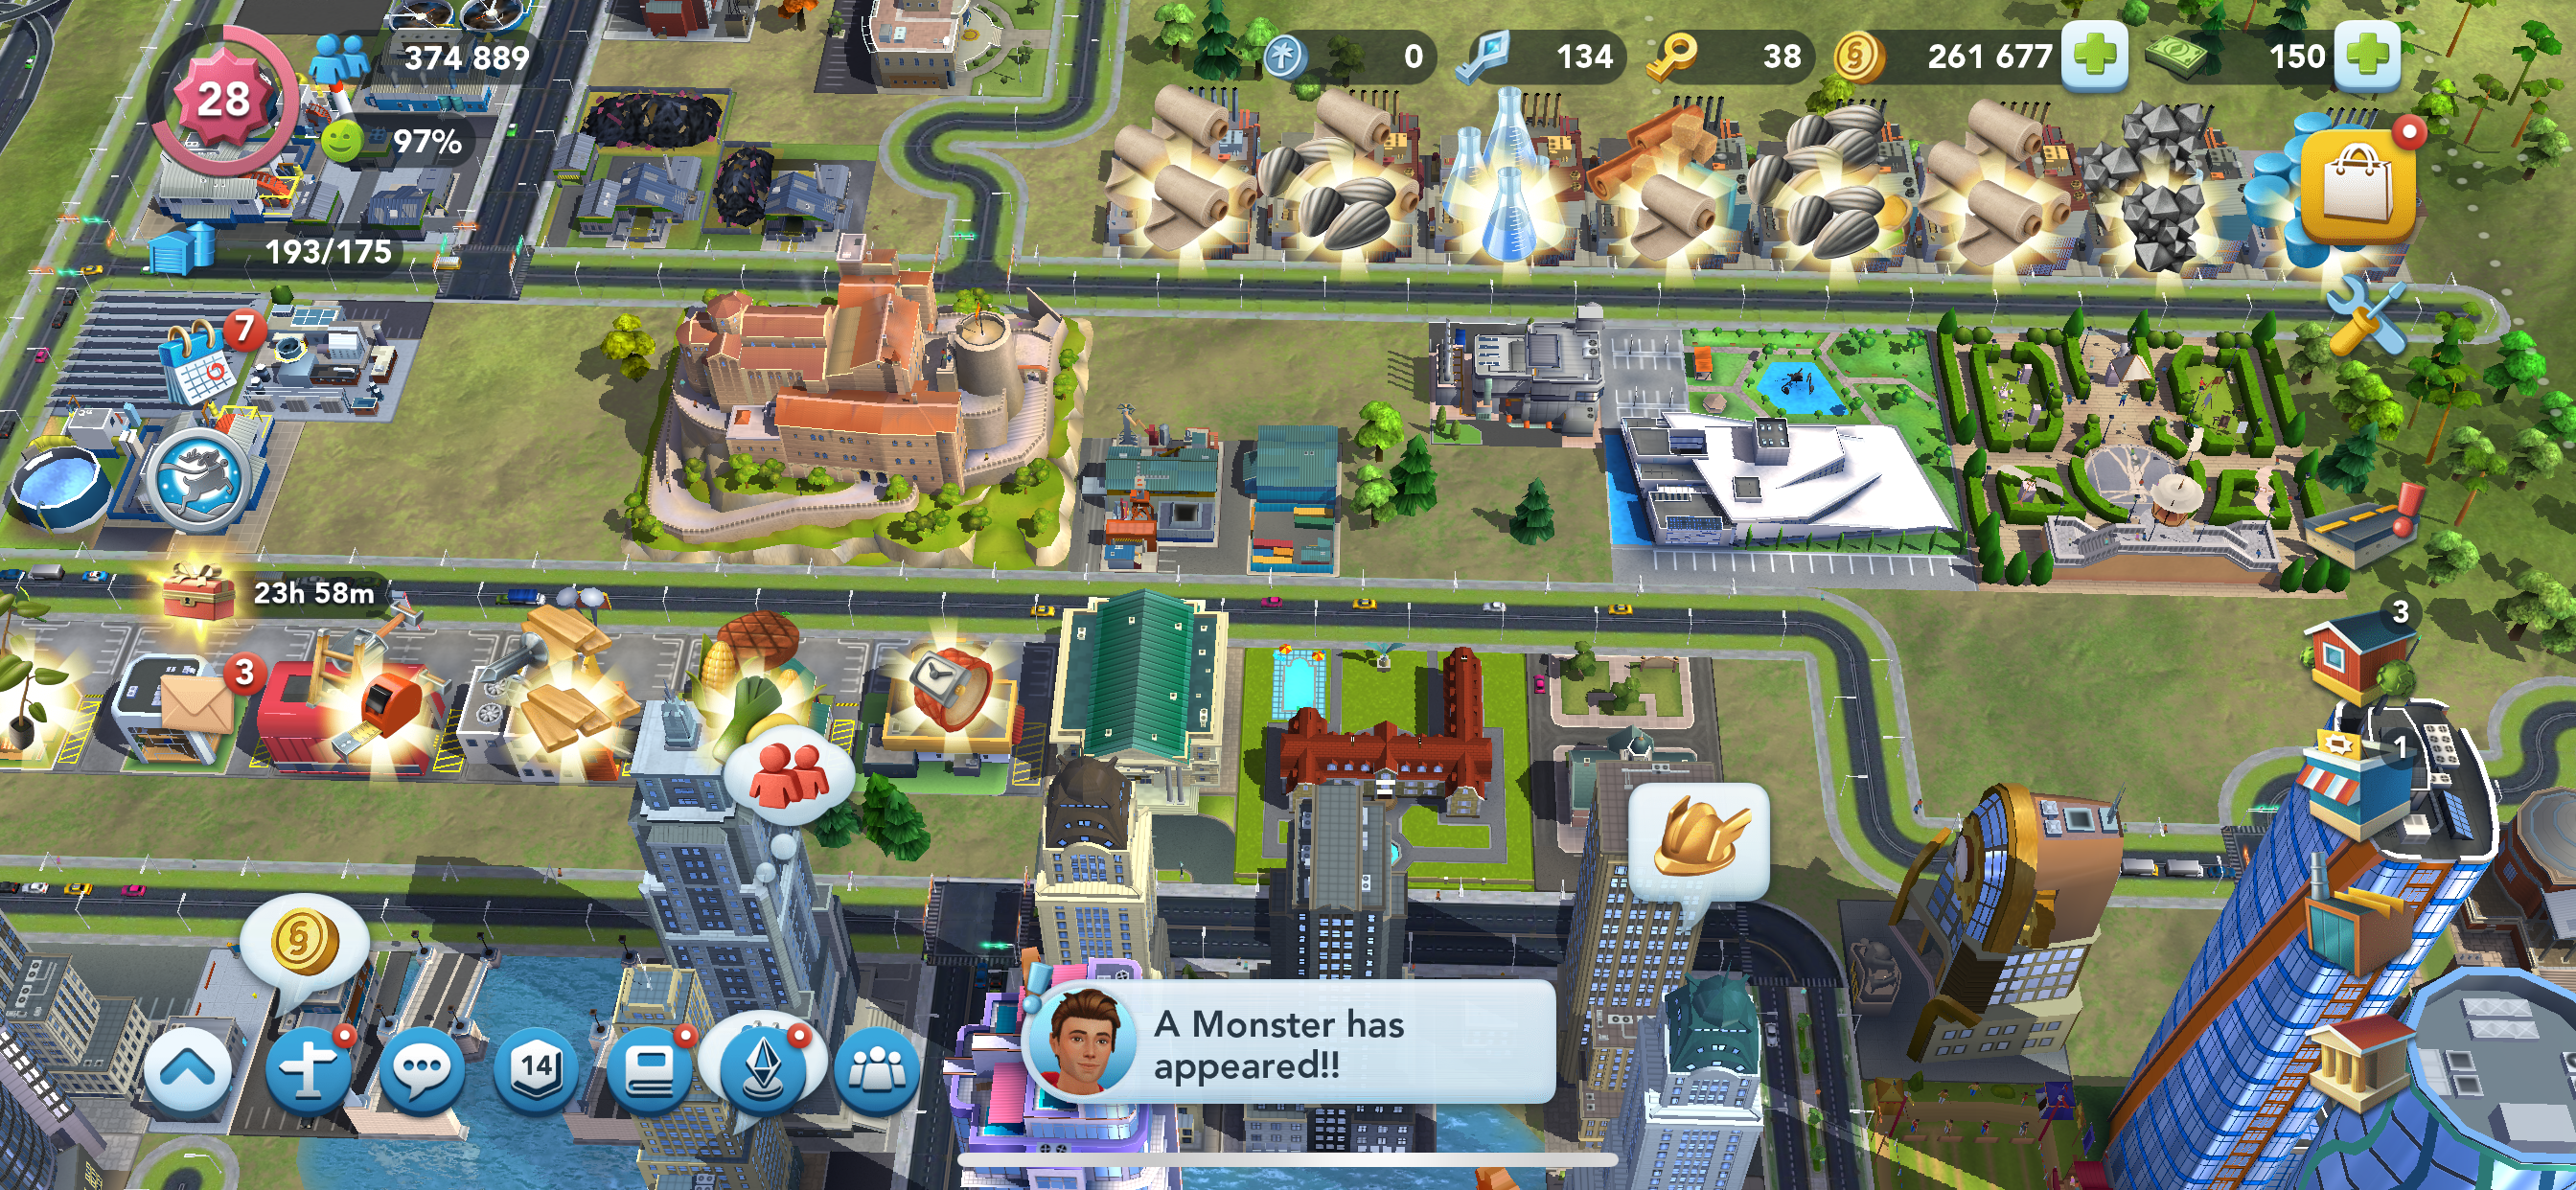 Screenshot of SimCity BuildIt mobile game app showing production factories, city government buildings, homes, and storefronts 